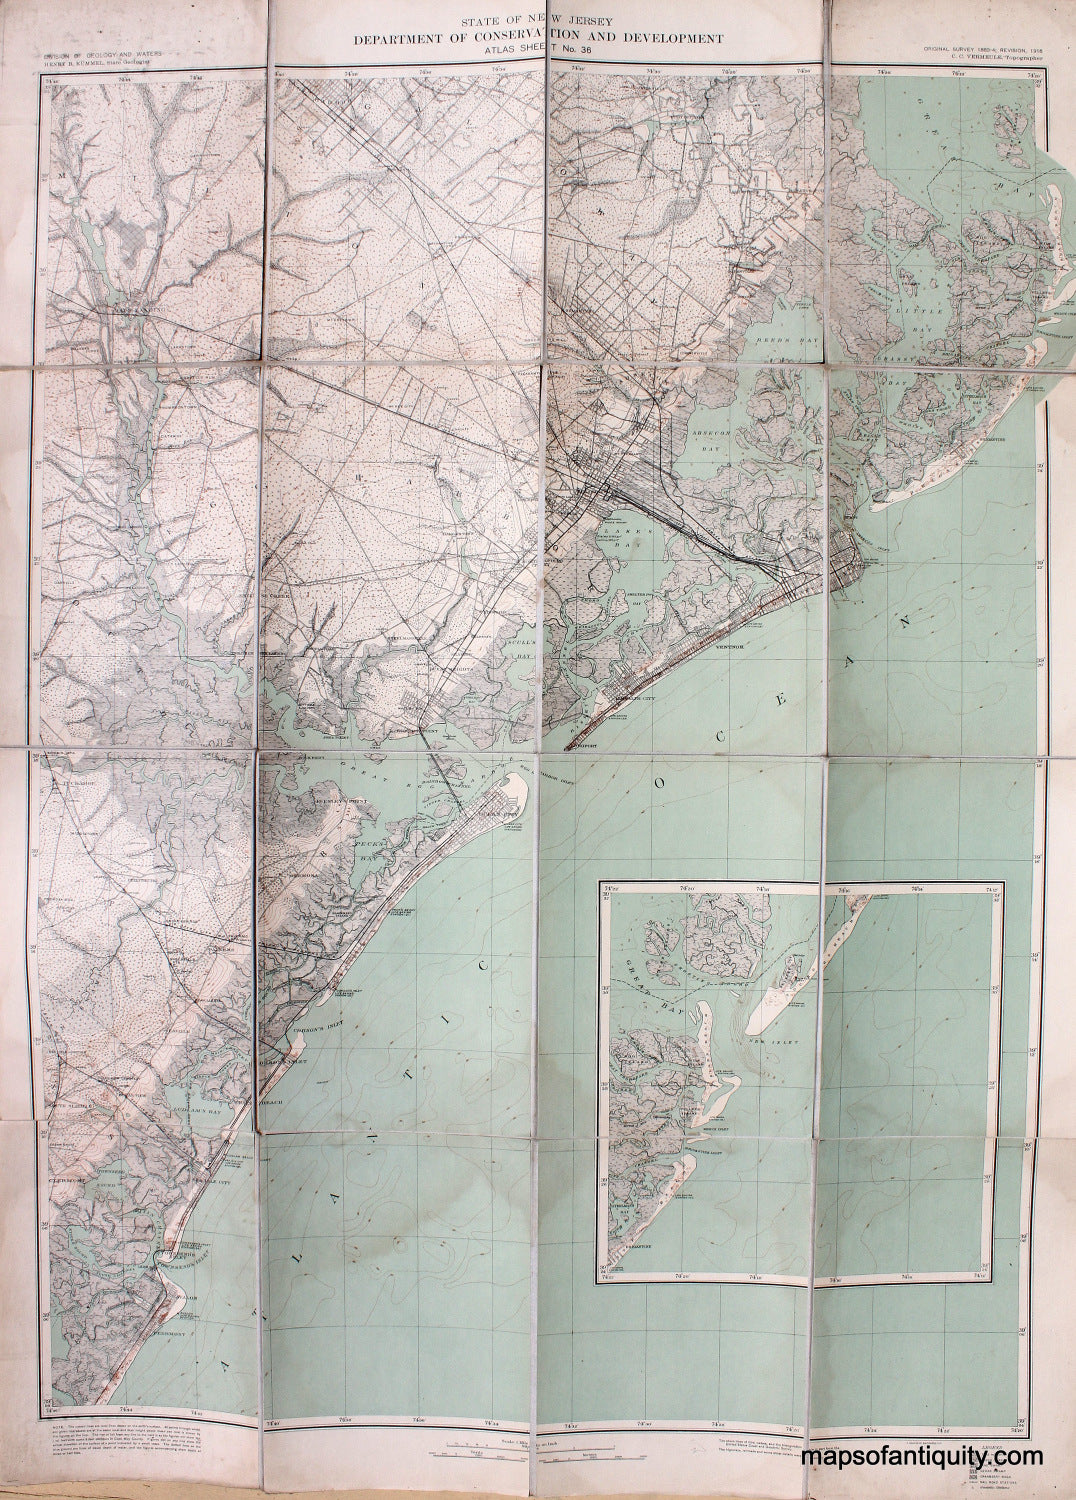 Antique-Folding-Topographical-Map-Printed-Color-Atlantic-City-New-Jersey-Atlas-Sheet-No.-36-New-Jersey-Folding-Maps-1916-State-of-New-Jersey-Department-of-Conservation-and-Development-Maps-Of-Antiquity